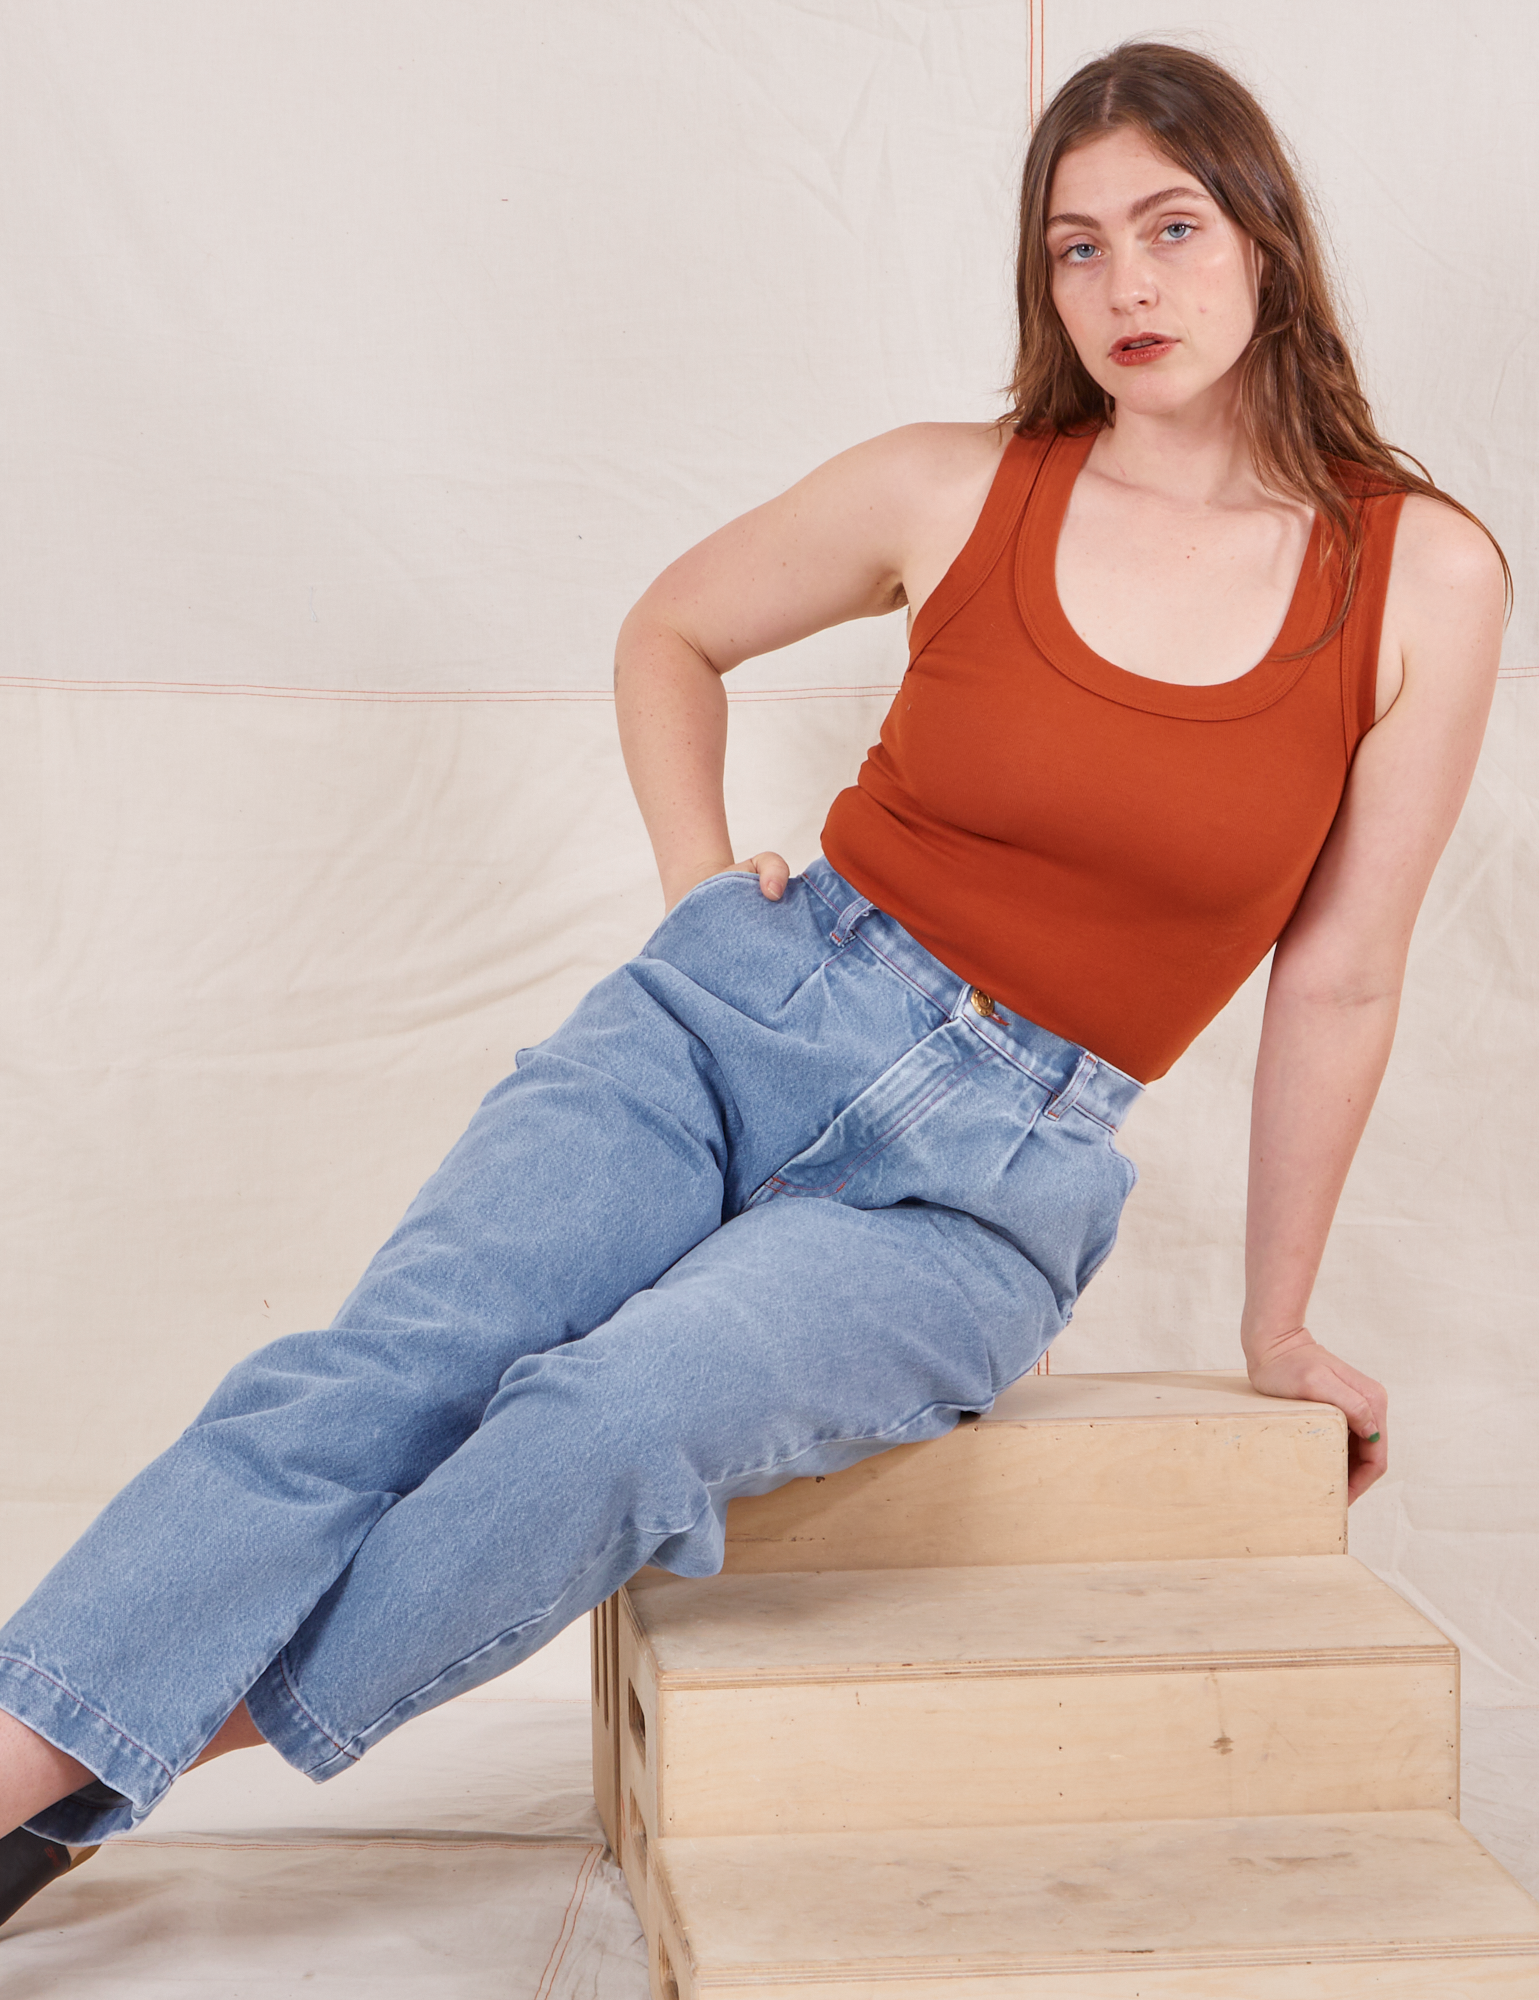 Allison is sitting on a wooden crate wearing Denim Trouser Jeans in Light Wash and a burnt orange Tank Top